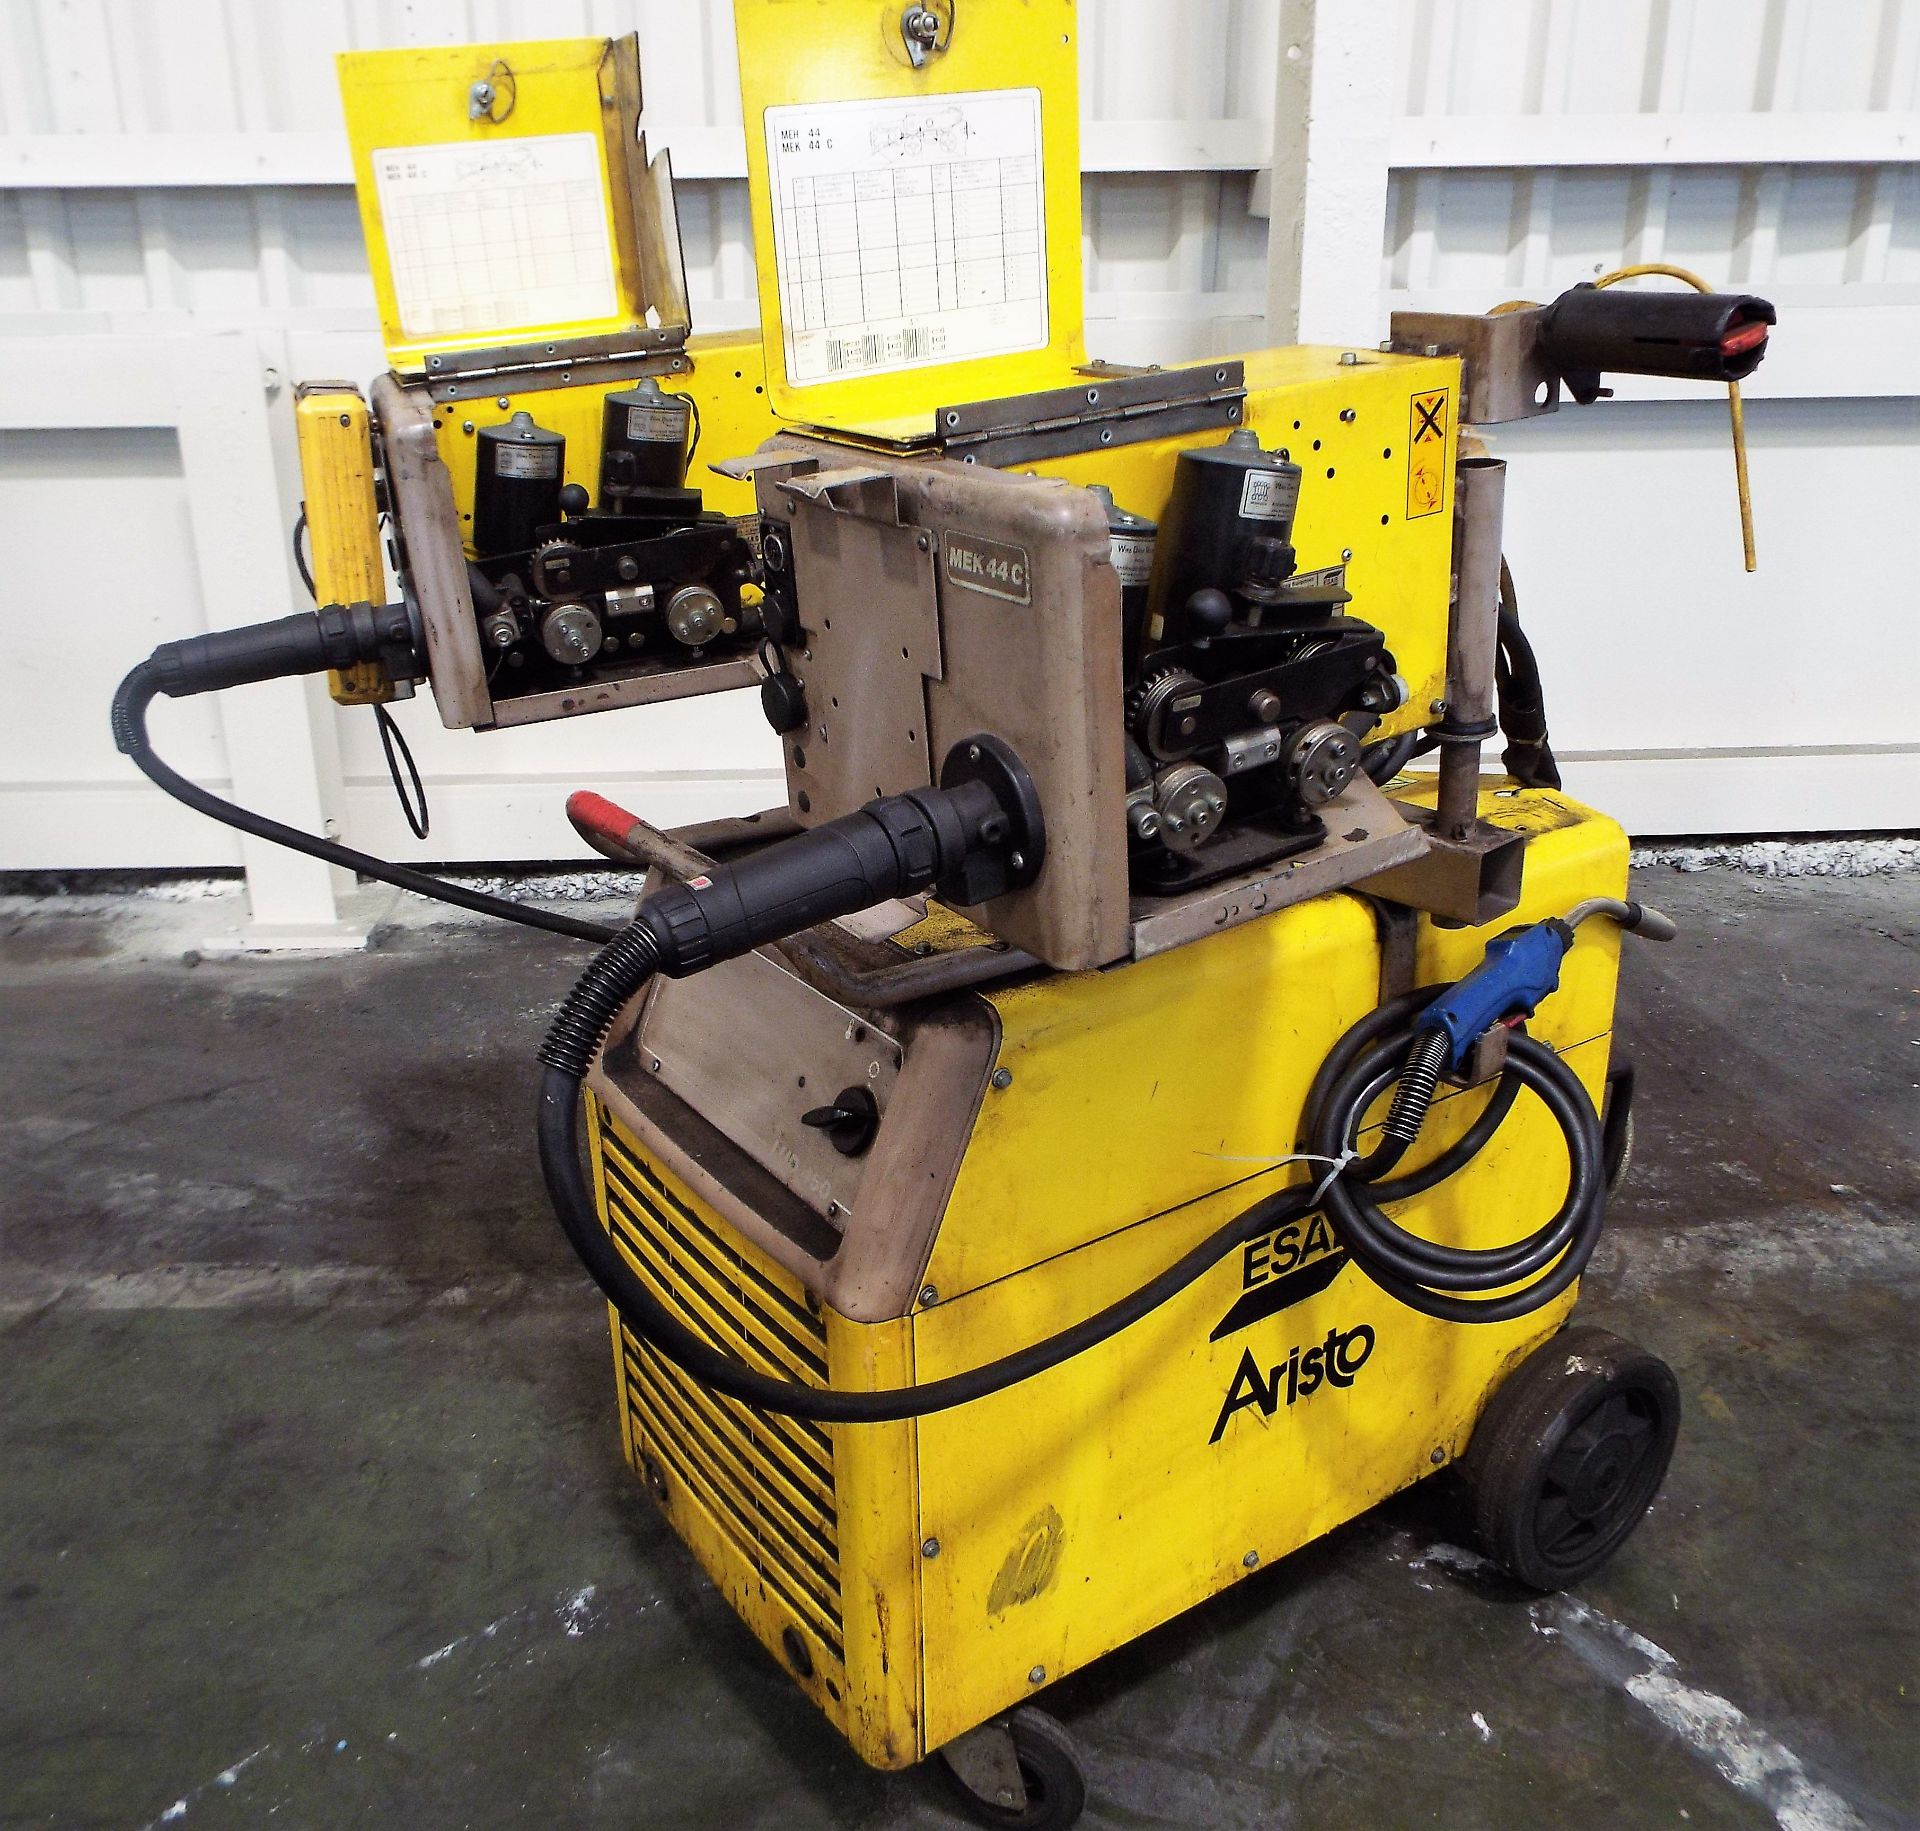 Esab Aristo LUD 450 Portable Welding Set, with dual station MEK 44C Wire Feeds & PUA-1 Pendant. - Image 4 of 7